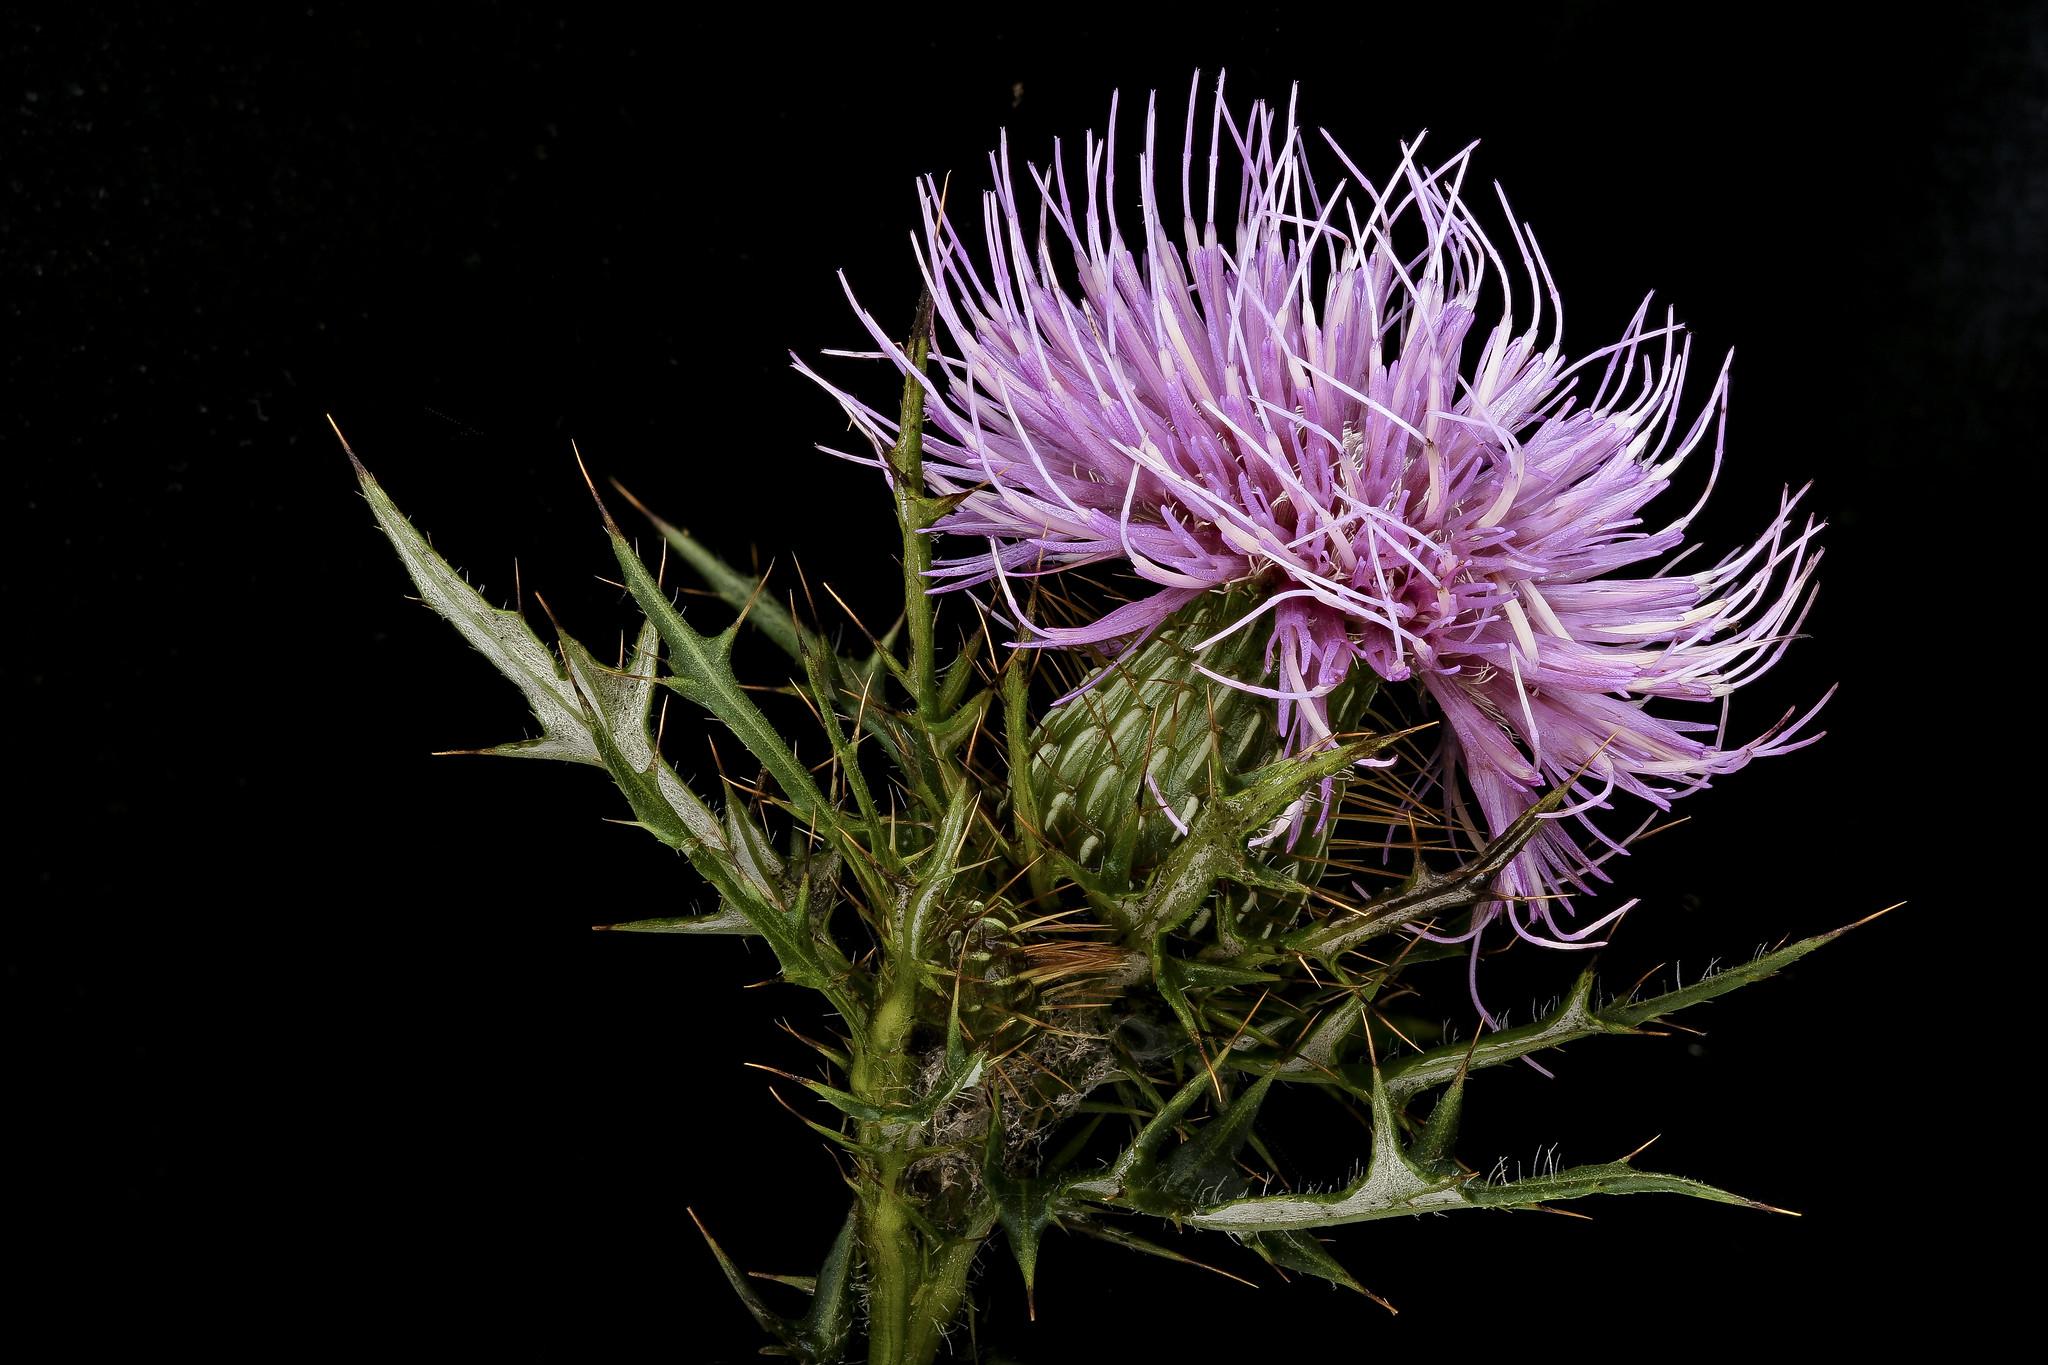 Pasture thistle, also known as field thistle, is a native plant and a sign of a high-quality prairie. (USGS Bee Inventory and Monitoring Lab / Flickr Creative Commons)